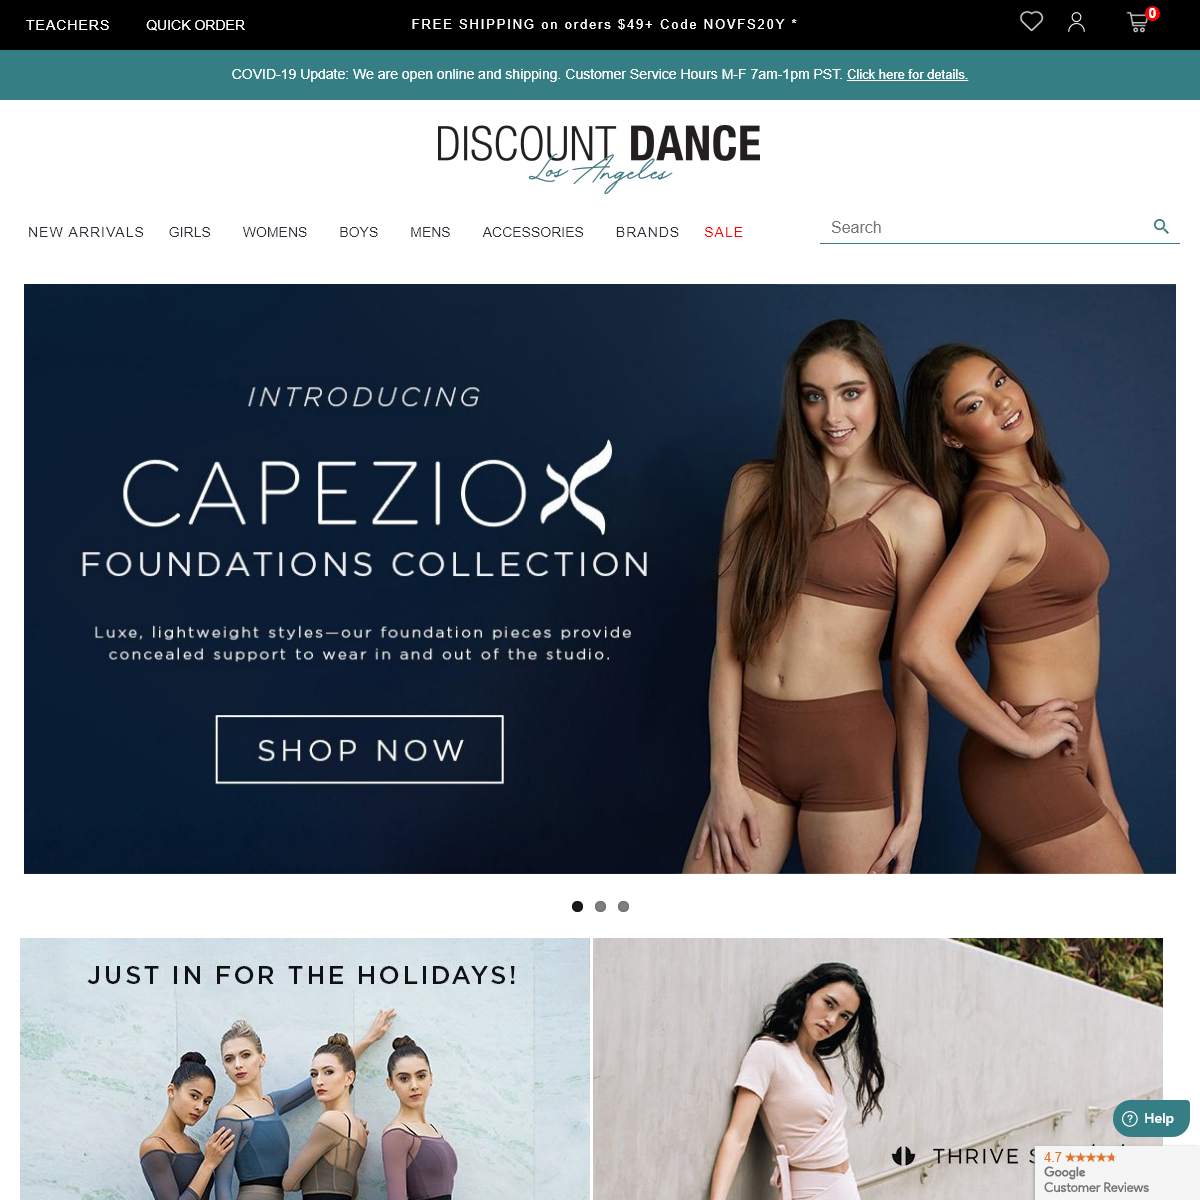 A complete backup of discountdance.com